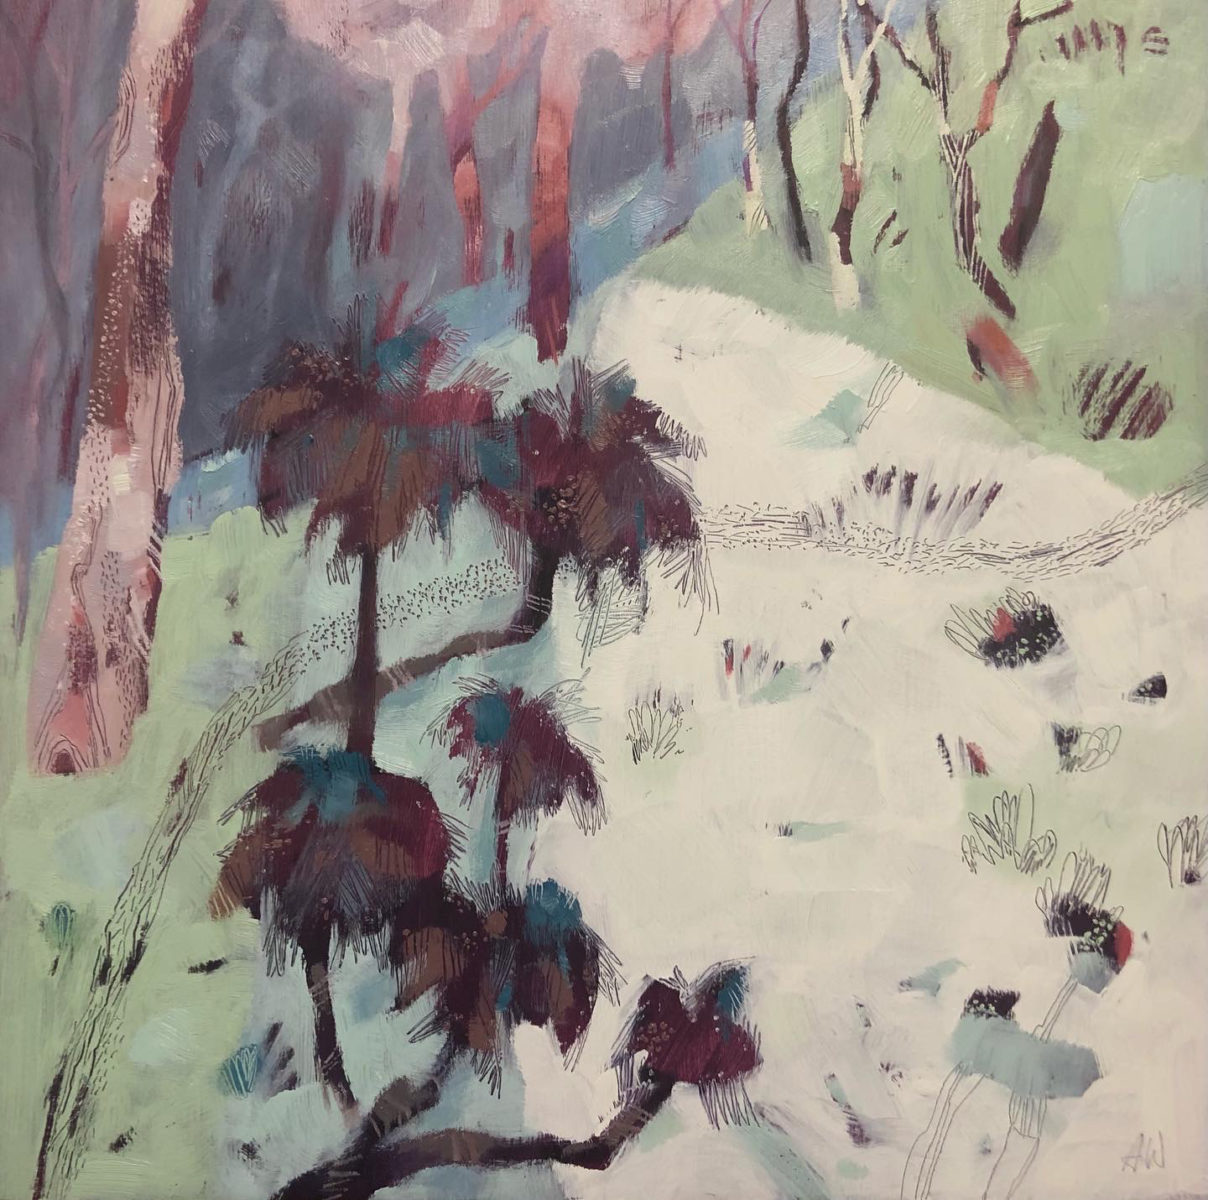 Cross country cross forests Carnarvon Gorge 2021 | Adrienne Williams | Oil on board | 30 x 30 cm | $850